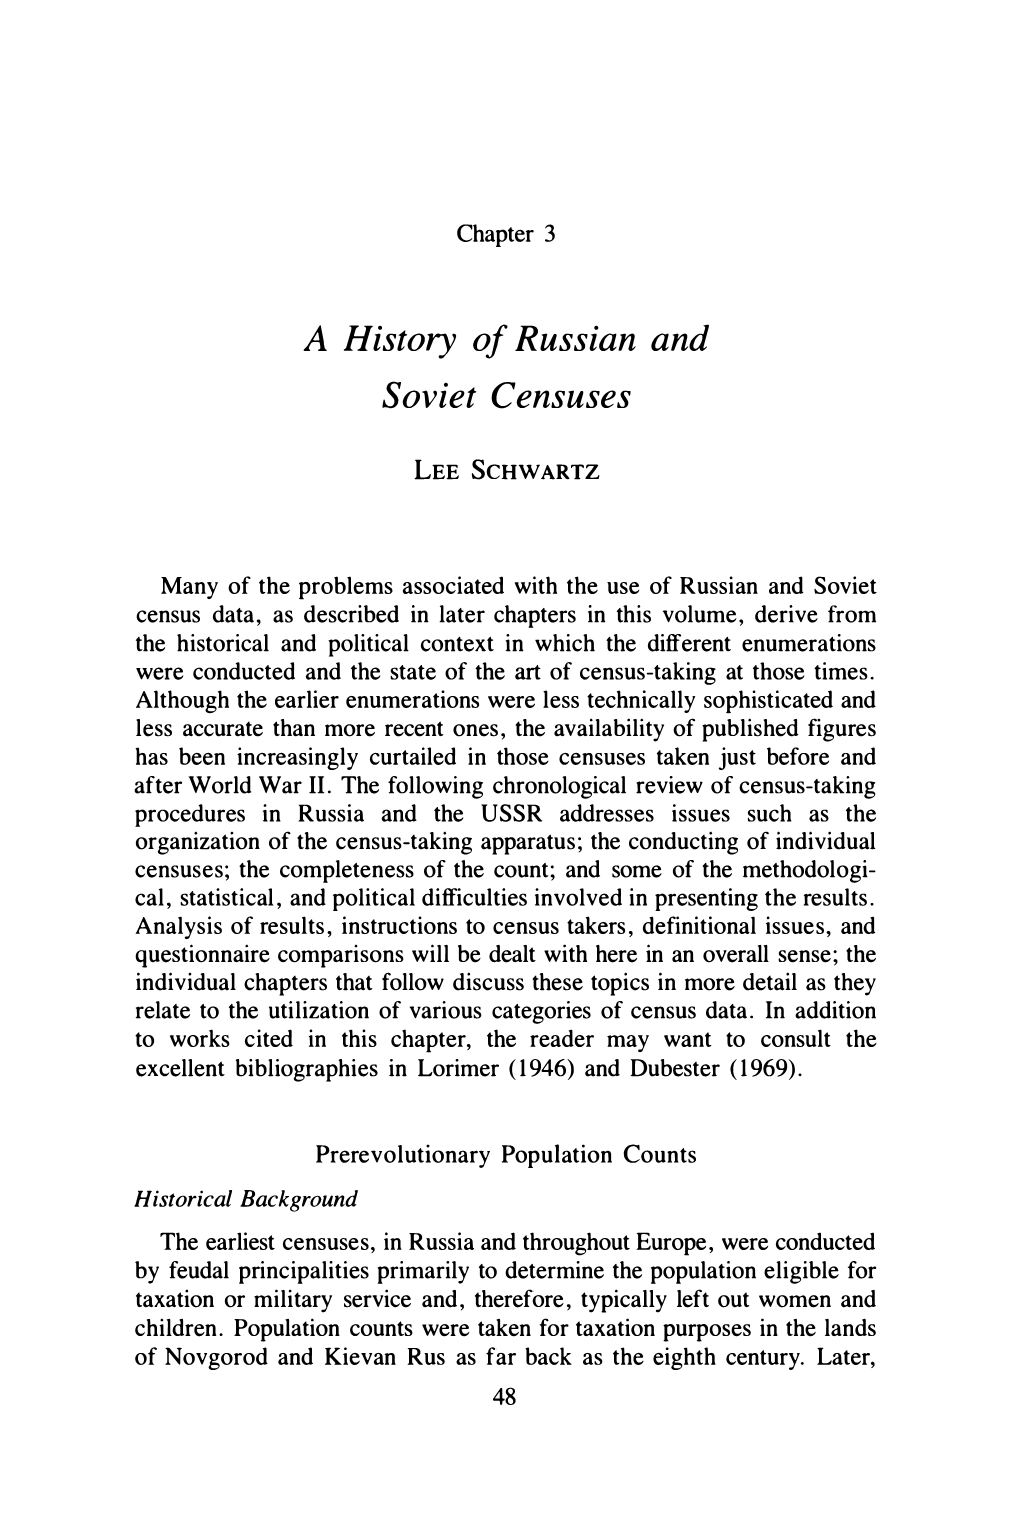 A History of Russian and Soviet Censuses